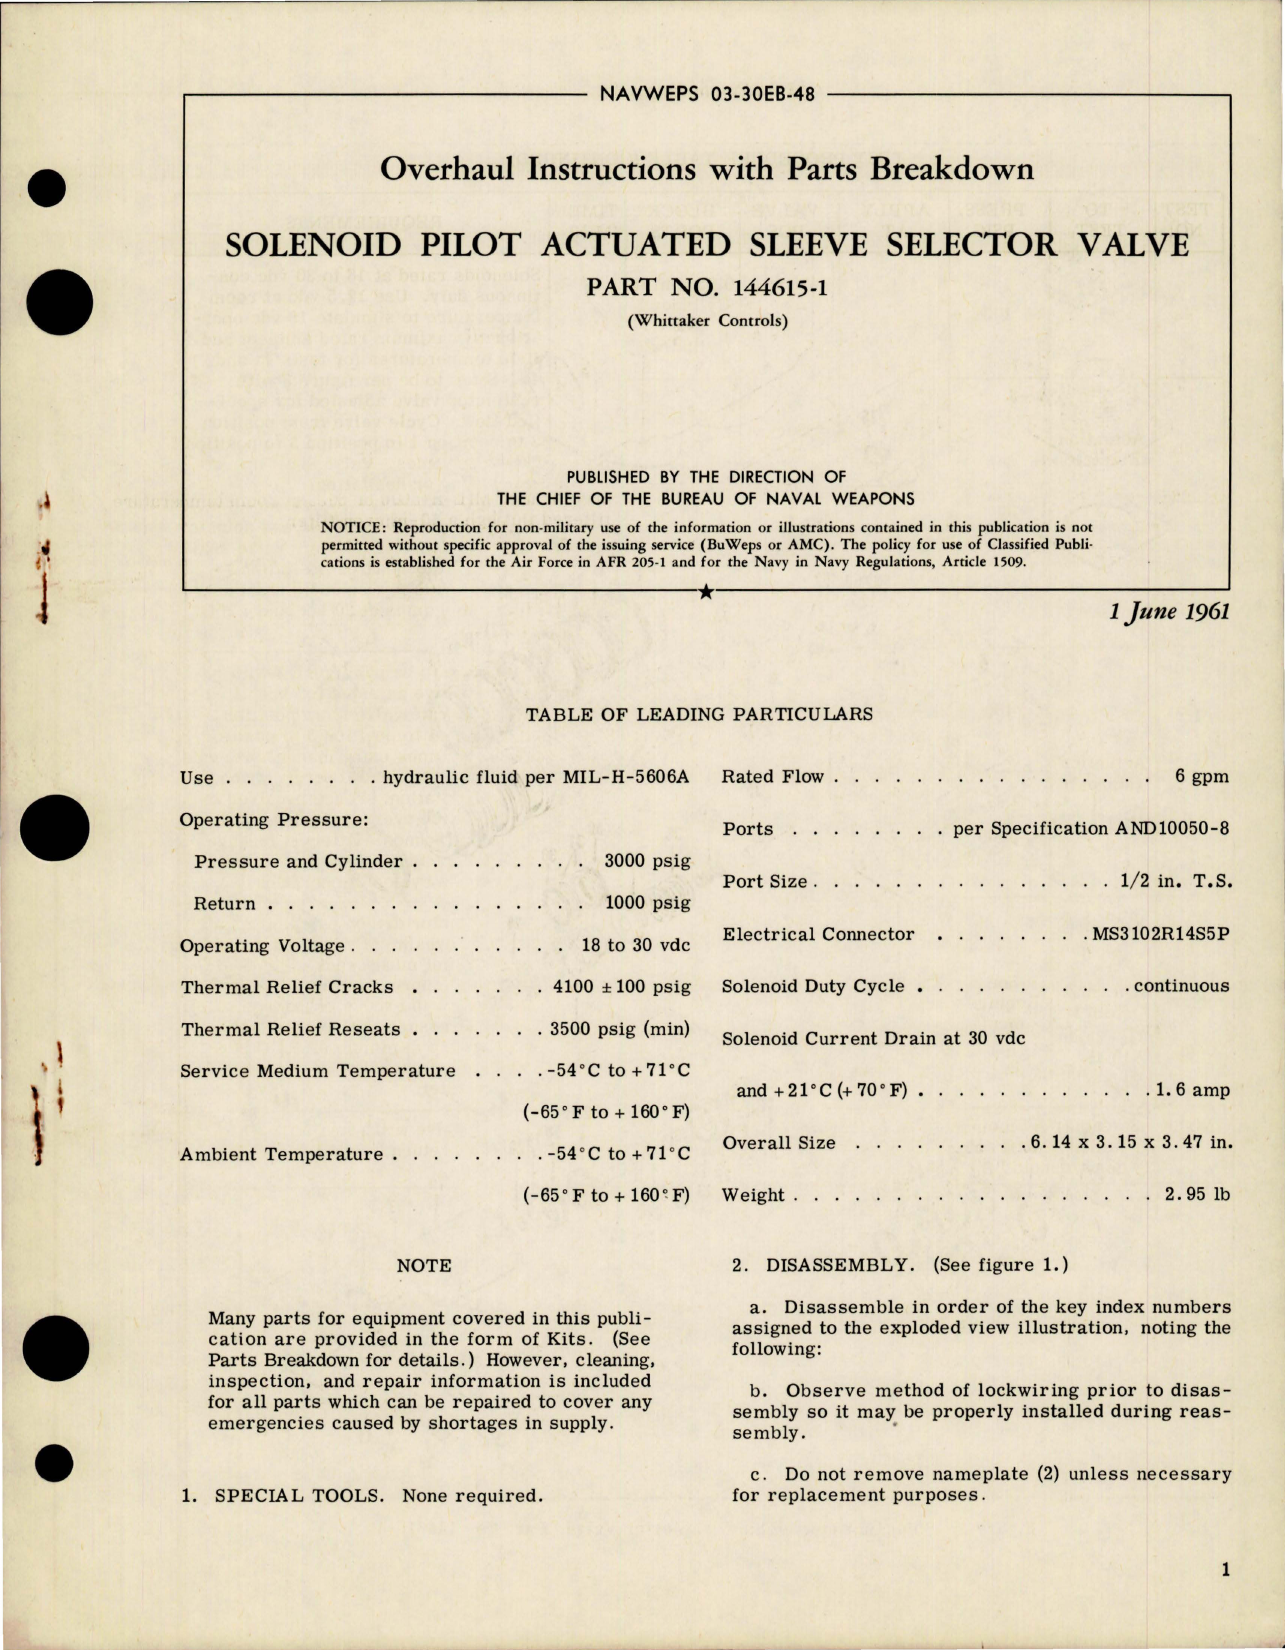 Sample page 1 from AirCorps Library document: Overhaul Instructions wikth Parts for Solenoid Pilot Actuated Sleeve Selector Valve - Part 144615-1